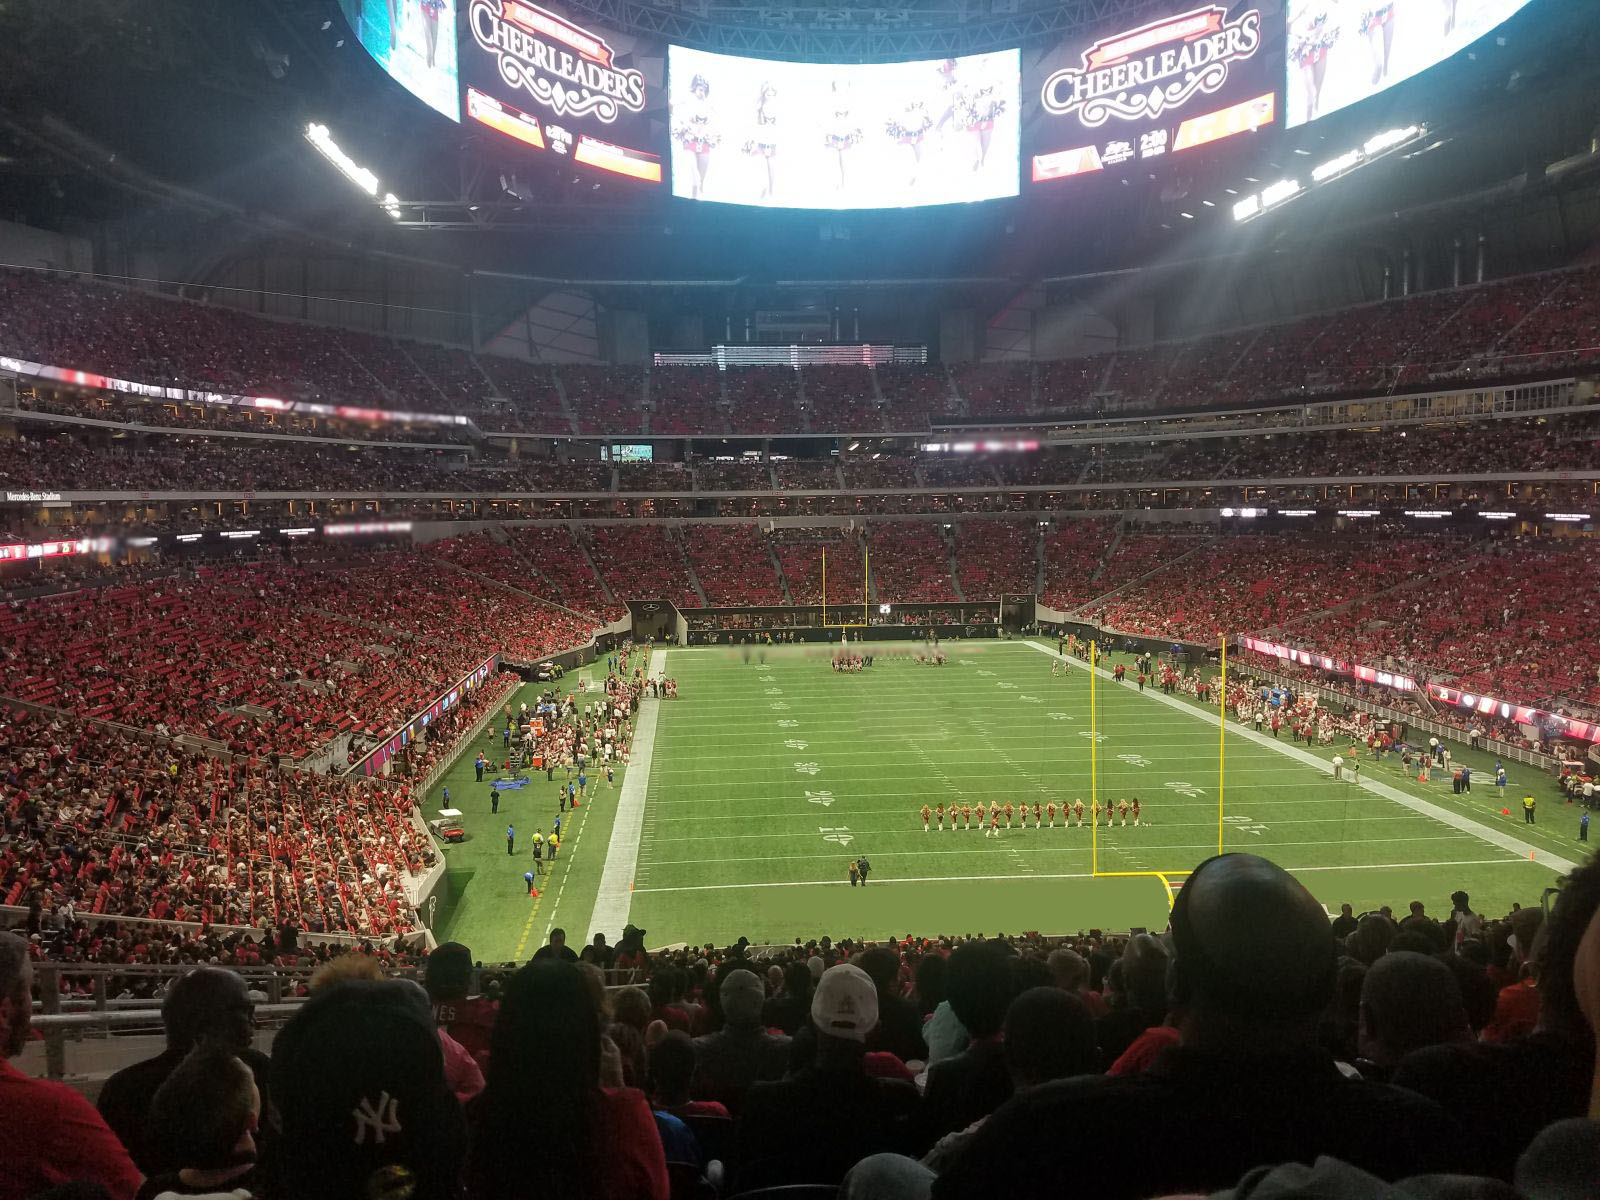 section 102, row 58 seat view  for football - mercedes-benz stadium